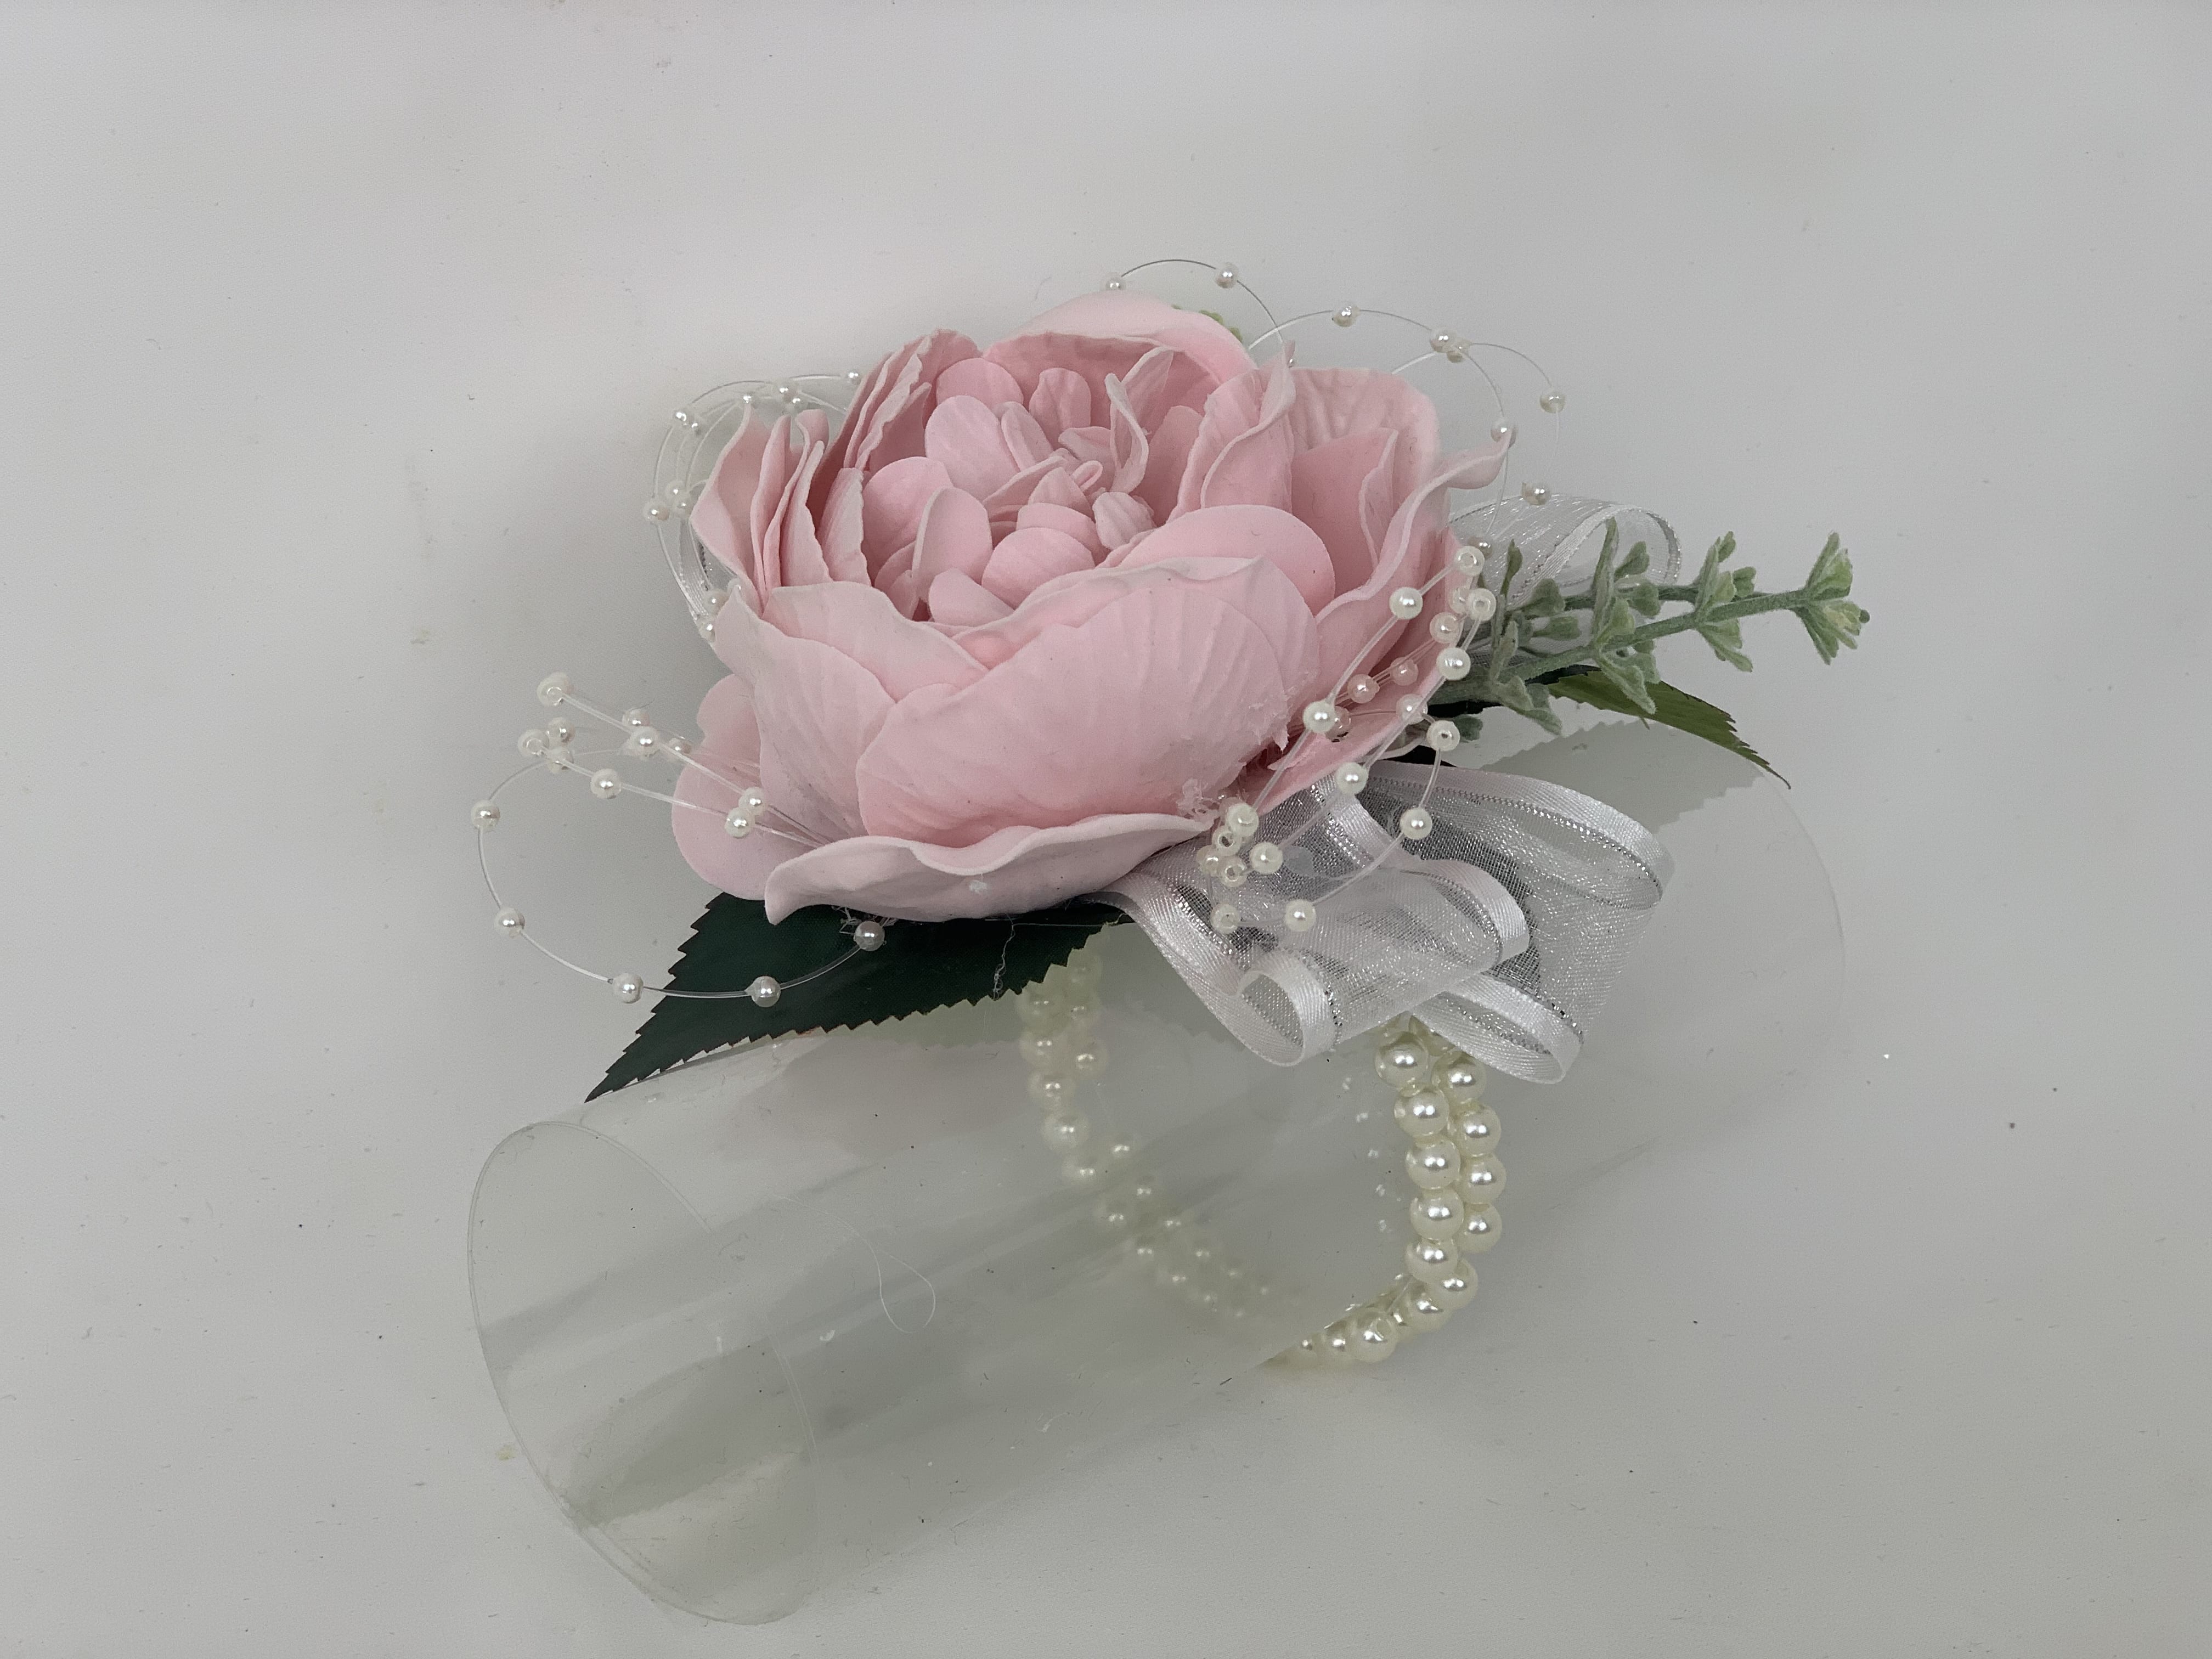 Wrist corsages done in a modern wire bracelet style